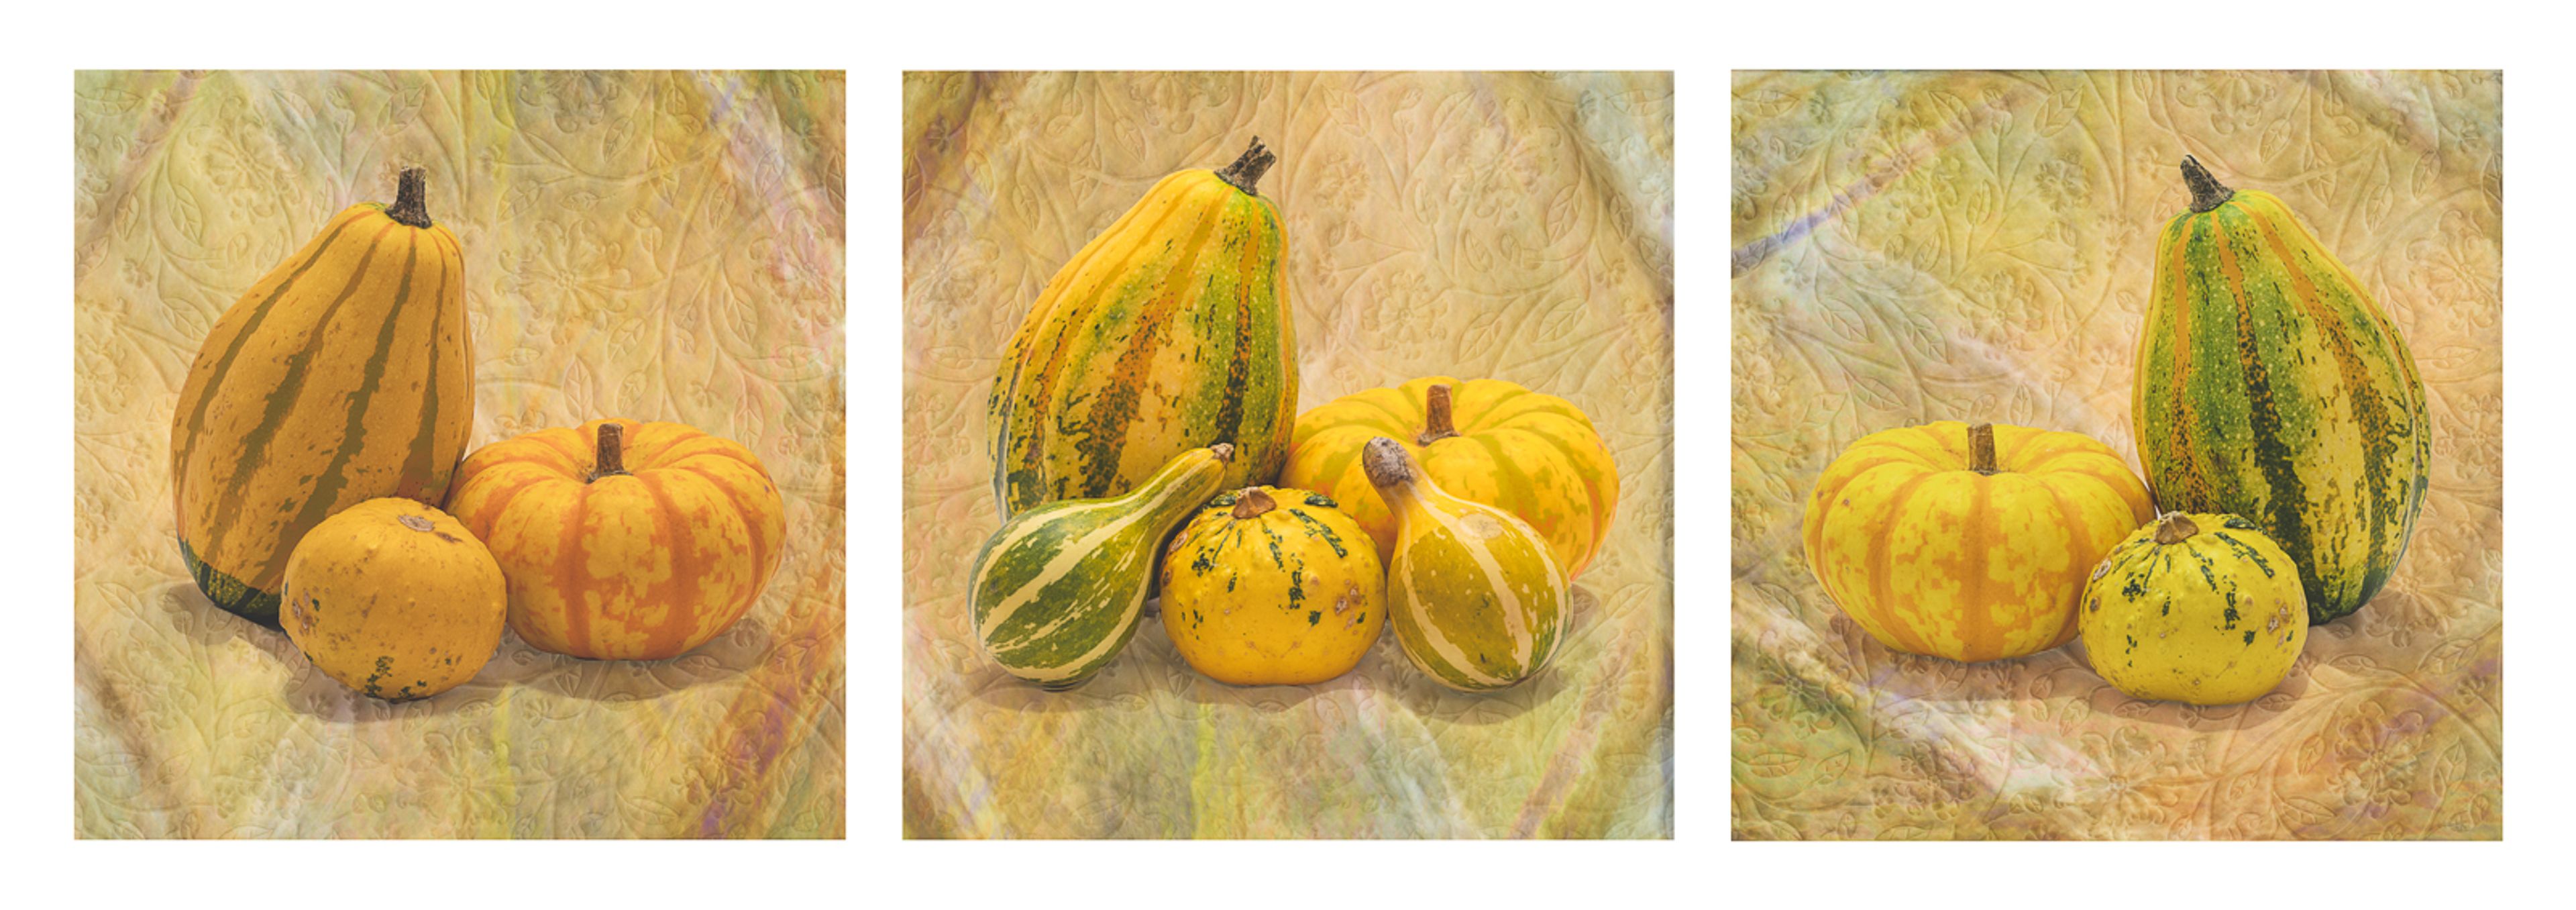 Gourd Still Life by Peter Bayliss